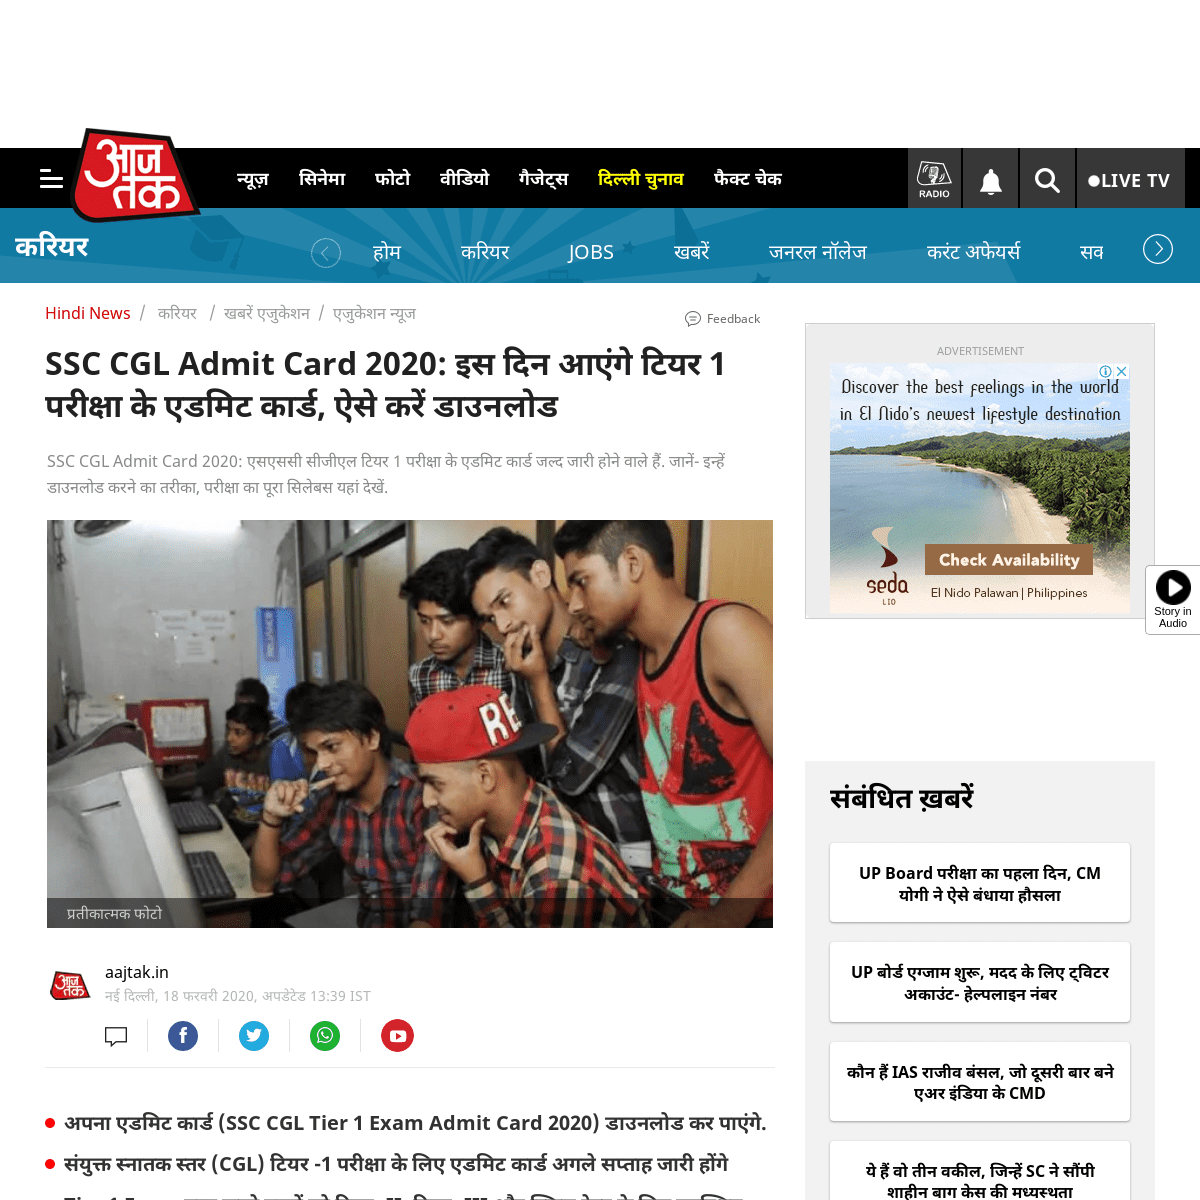 A complete backup of aajtak.intoday.in/education/story/ssc-cgl-admit-card-2020-tiar-1-exam-know-the-releasing-date-of-hall-entry